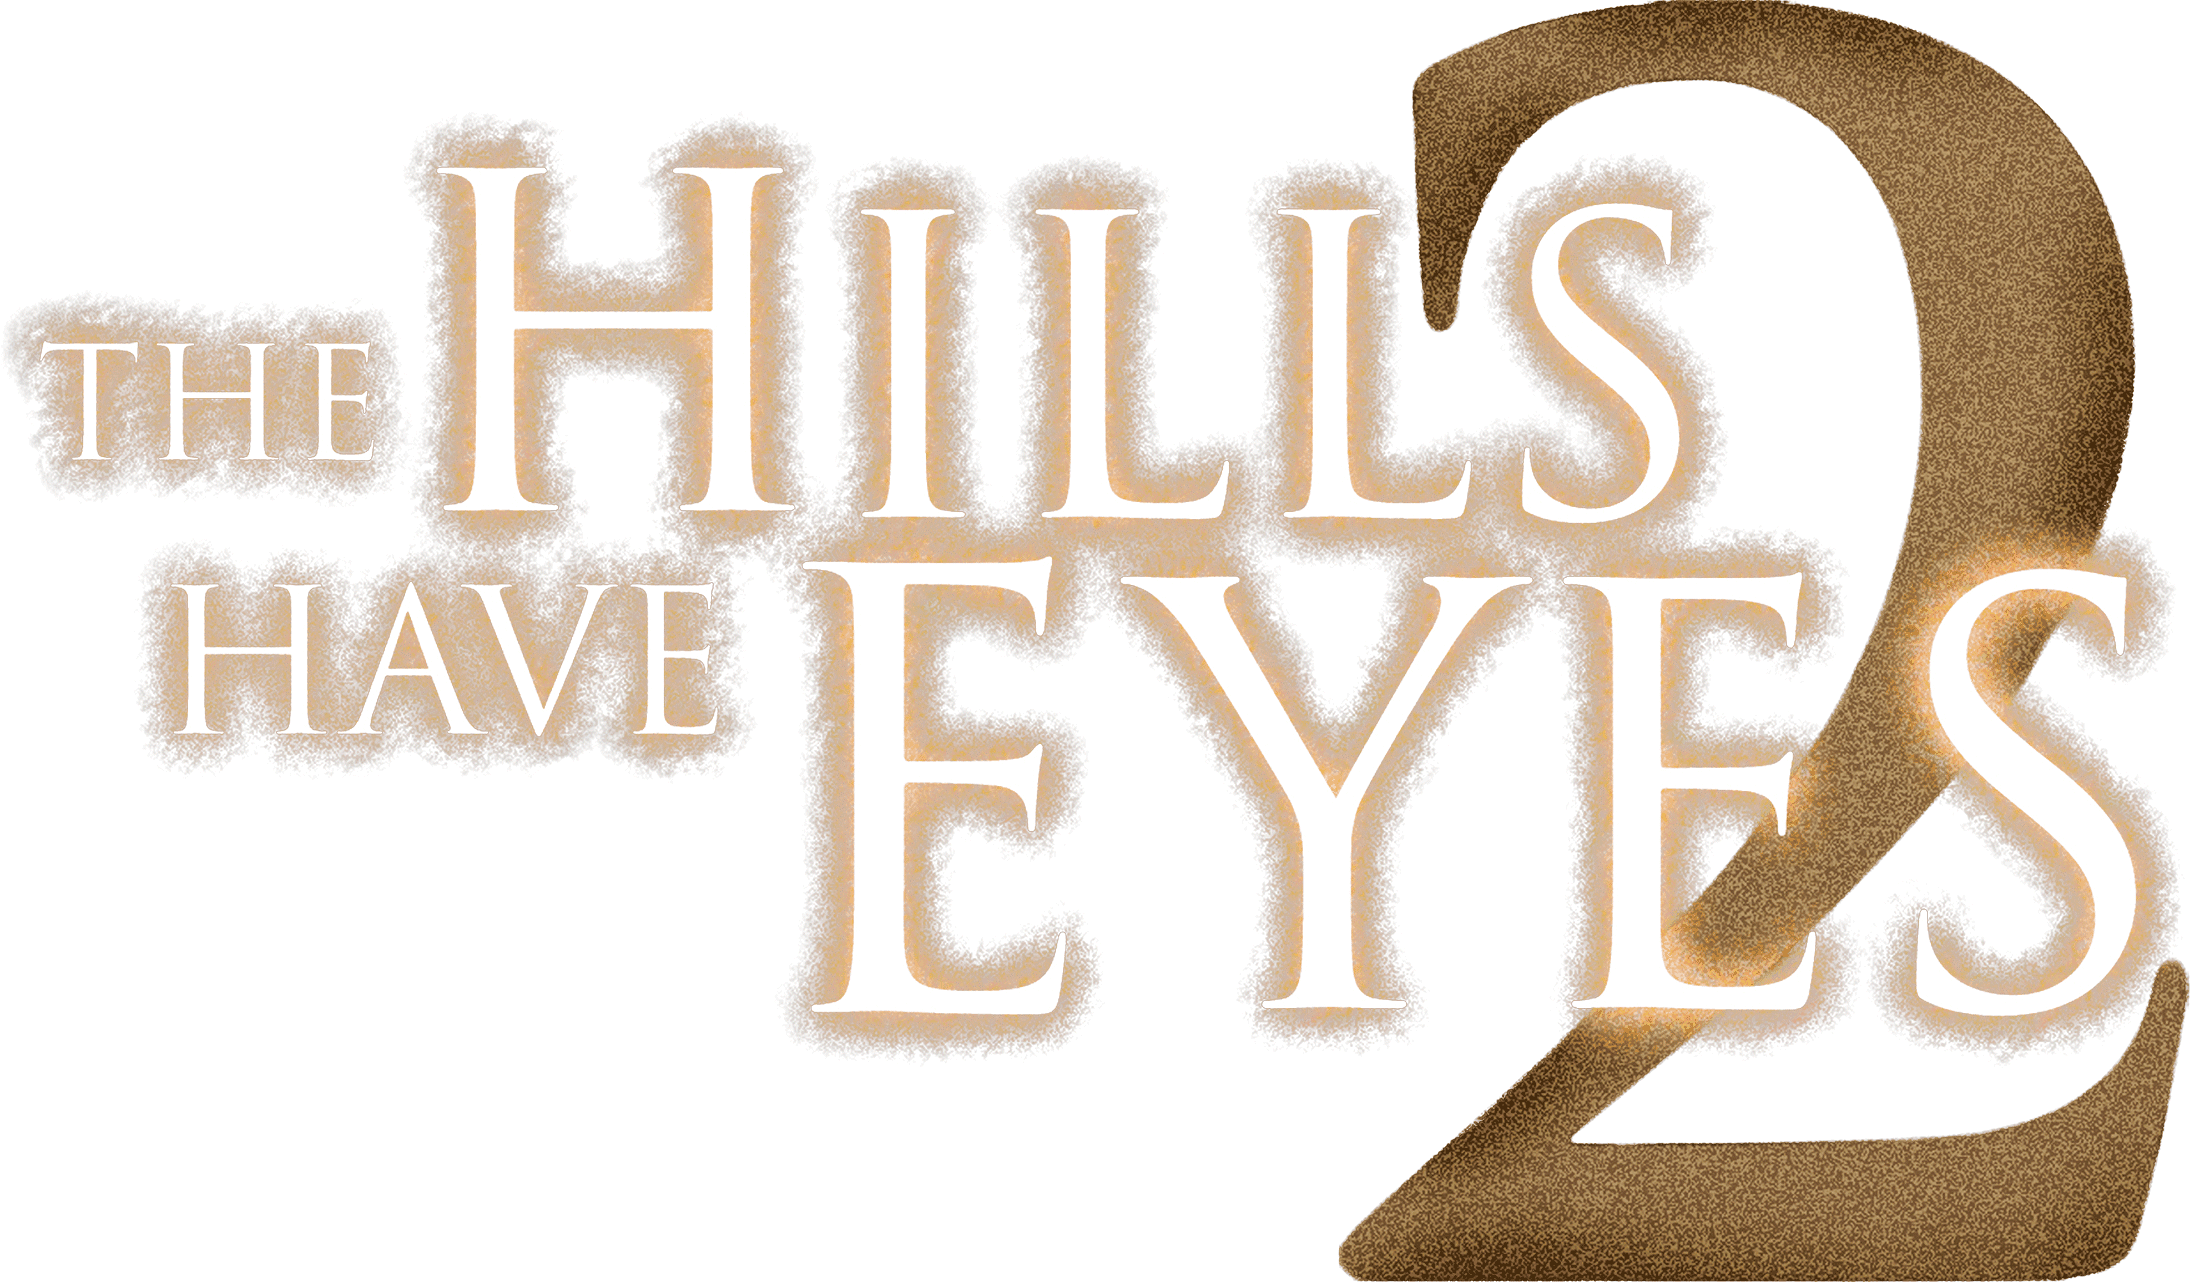 The Hills Have Eyes 2 logo